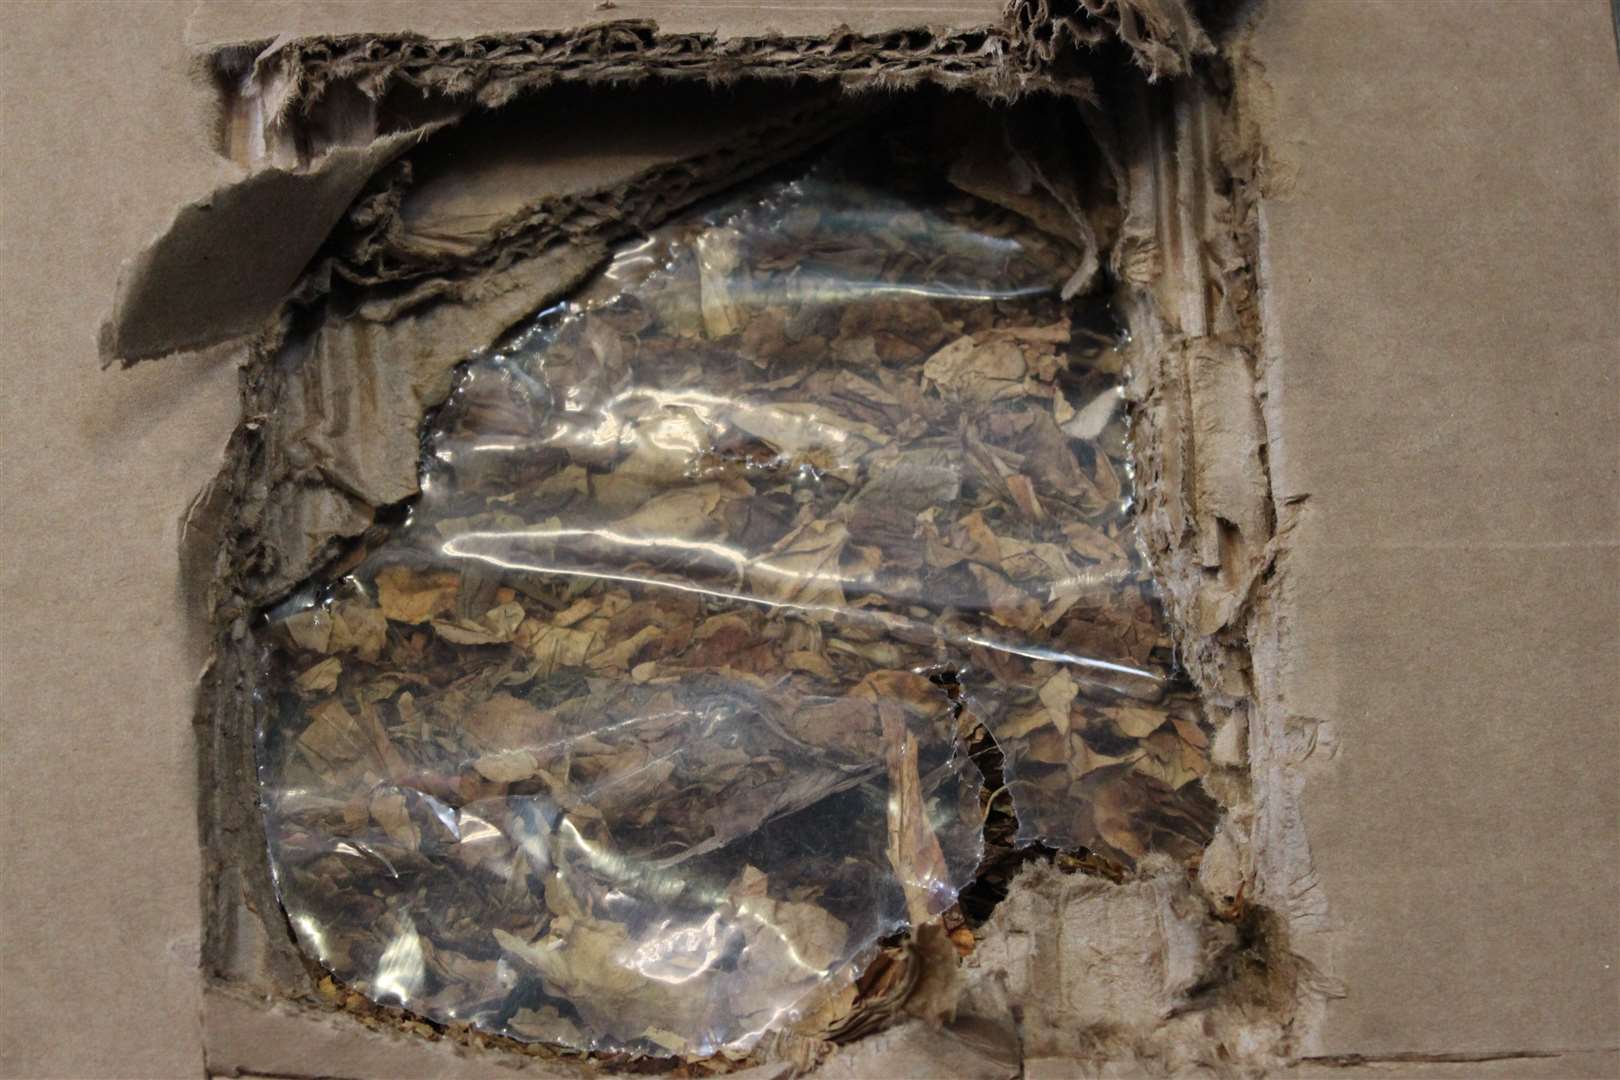 Tobacco found by Customs officers in the investigation. Picture: HM Revenue and Customs